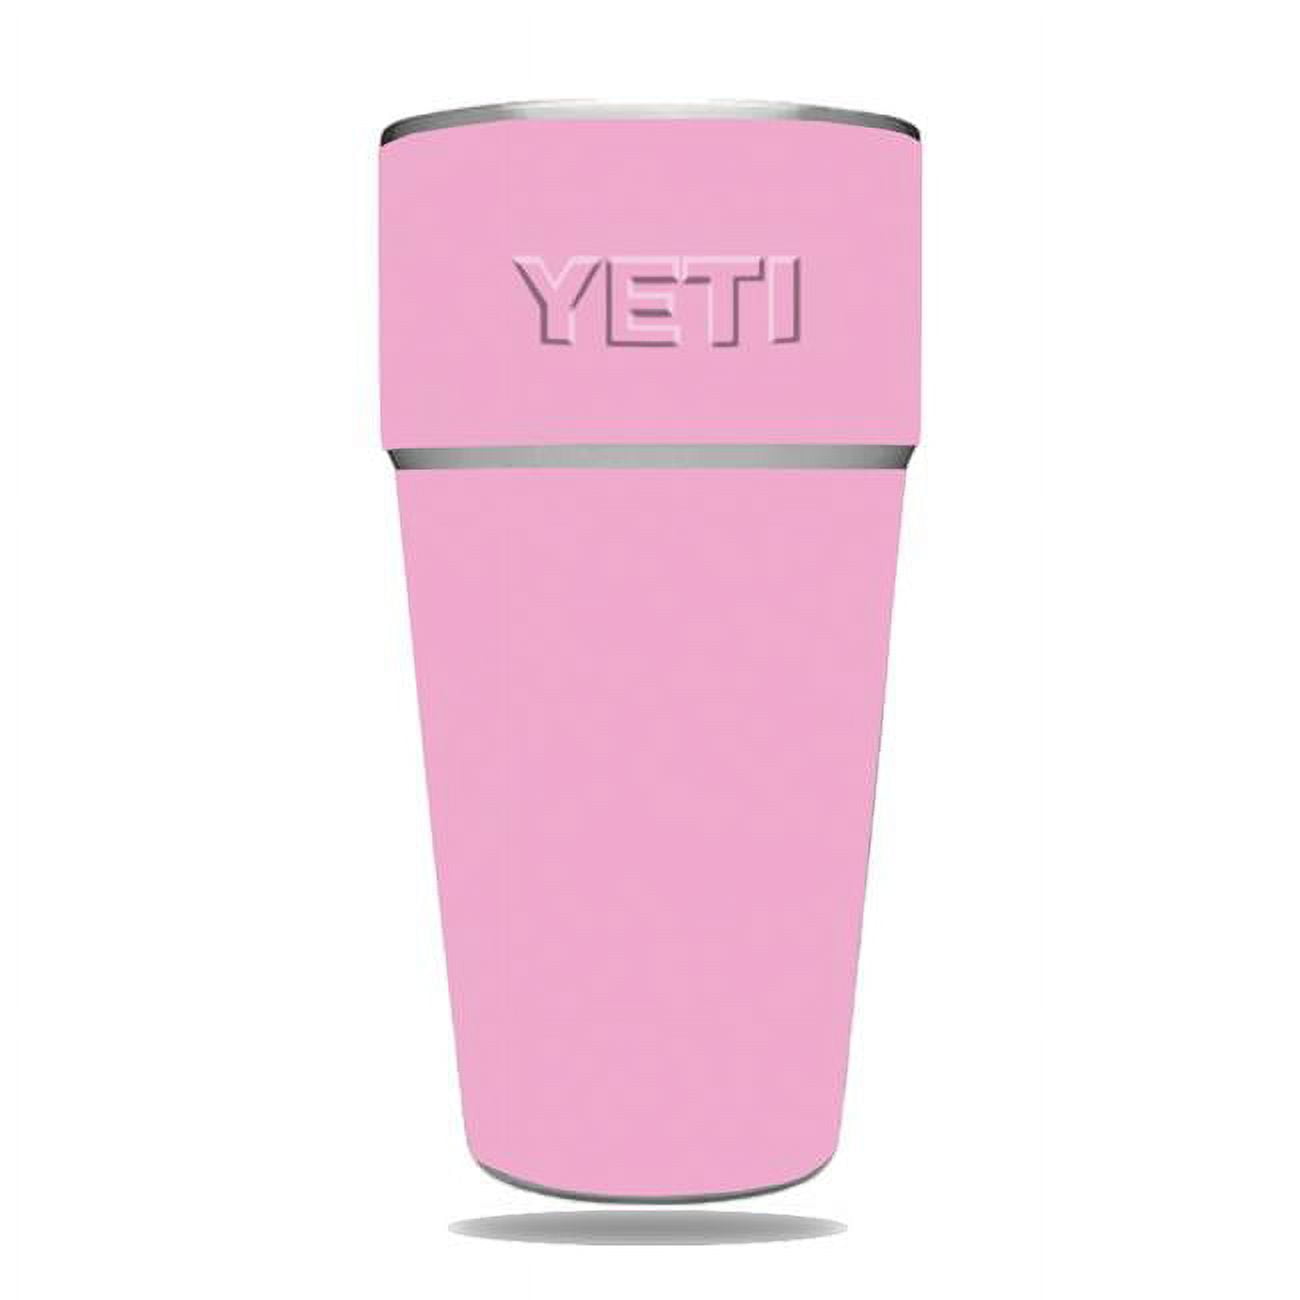 MightySkins YERAM26SI-Solid Pink Skin for Yeti Rambler 26 oz Stackable Cup  - Solid Pink 